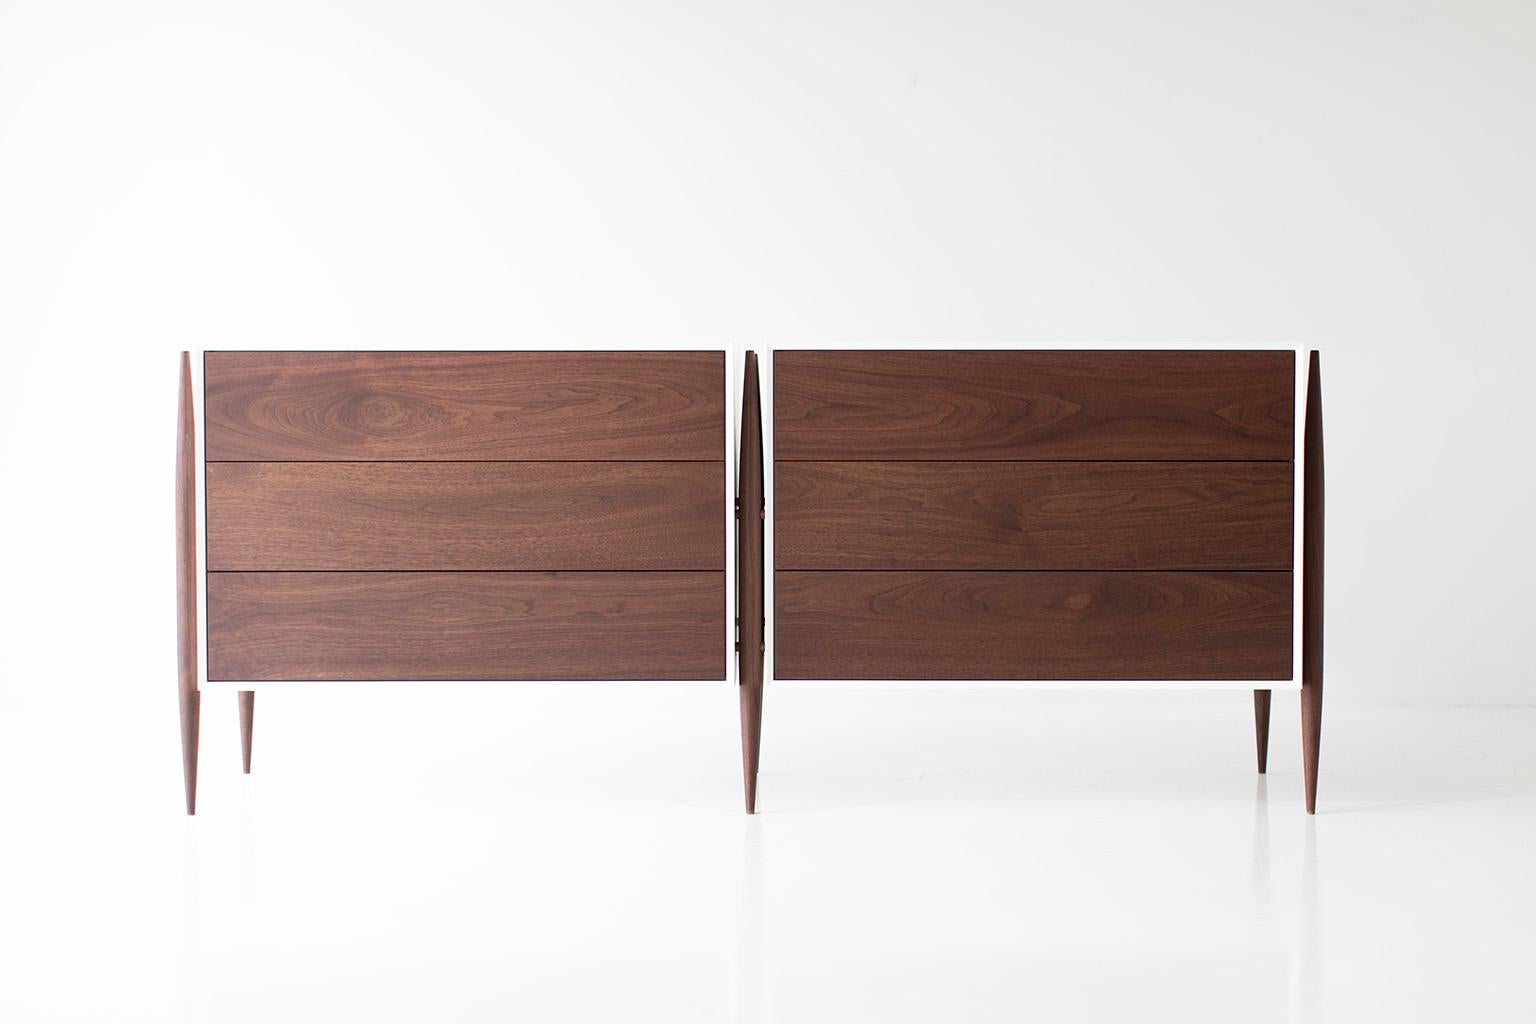 Modern walnut dresser - 2004 - Craft Associates Furniture

This modern walnut dresser from the Cambre Collection for Craft Associates Furniture is expertly crafted. The legs and door fronts are constructed by artisans from solid walnut. The frame